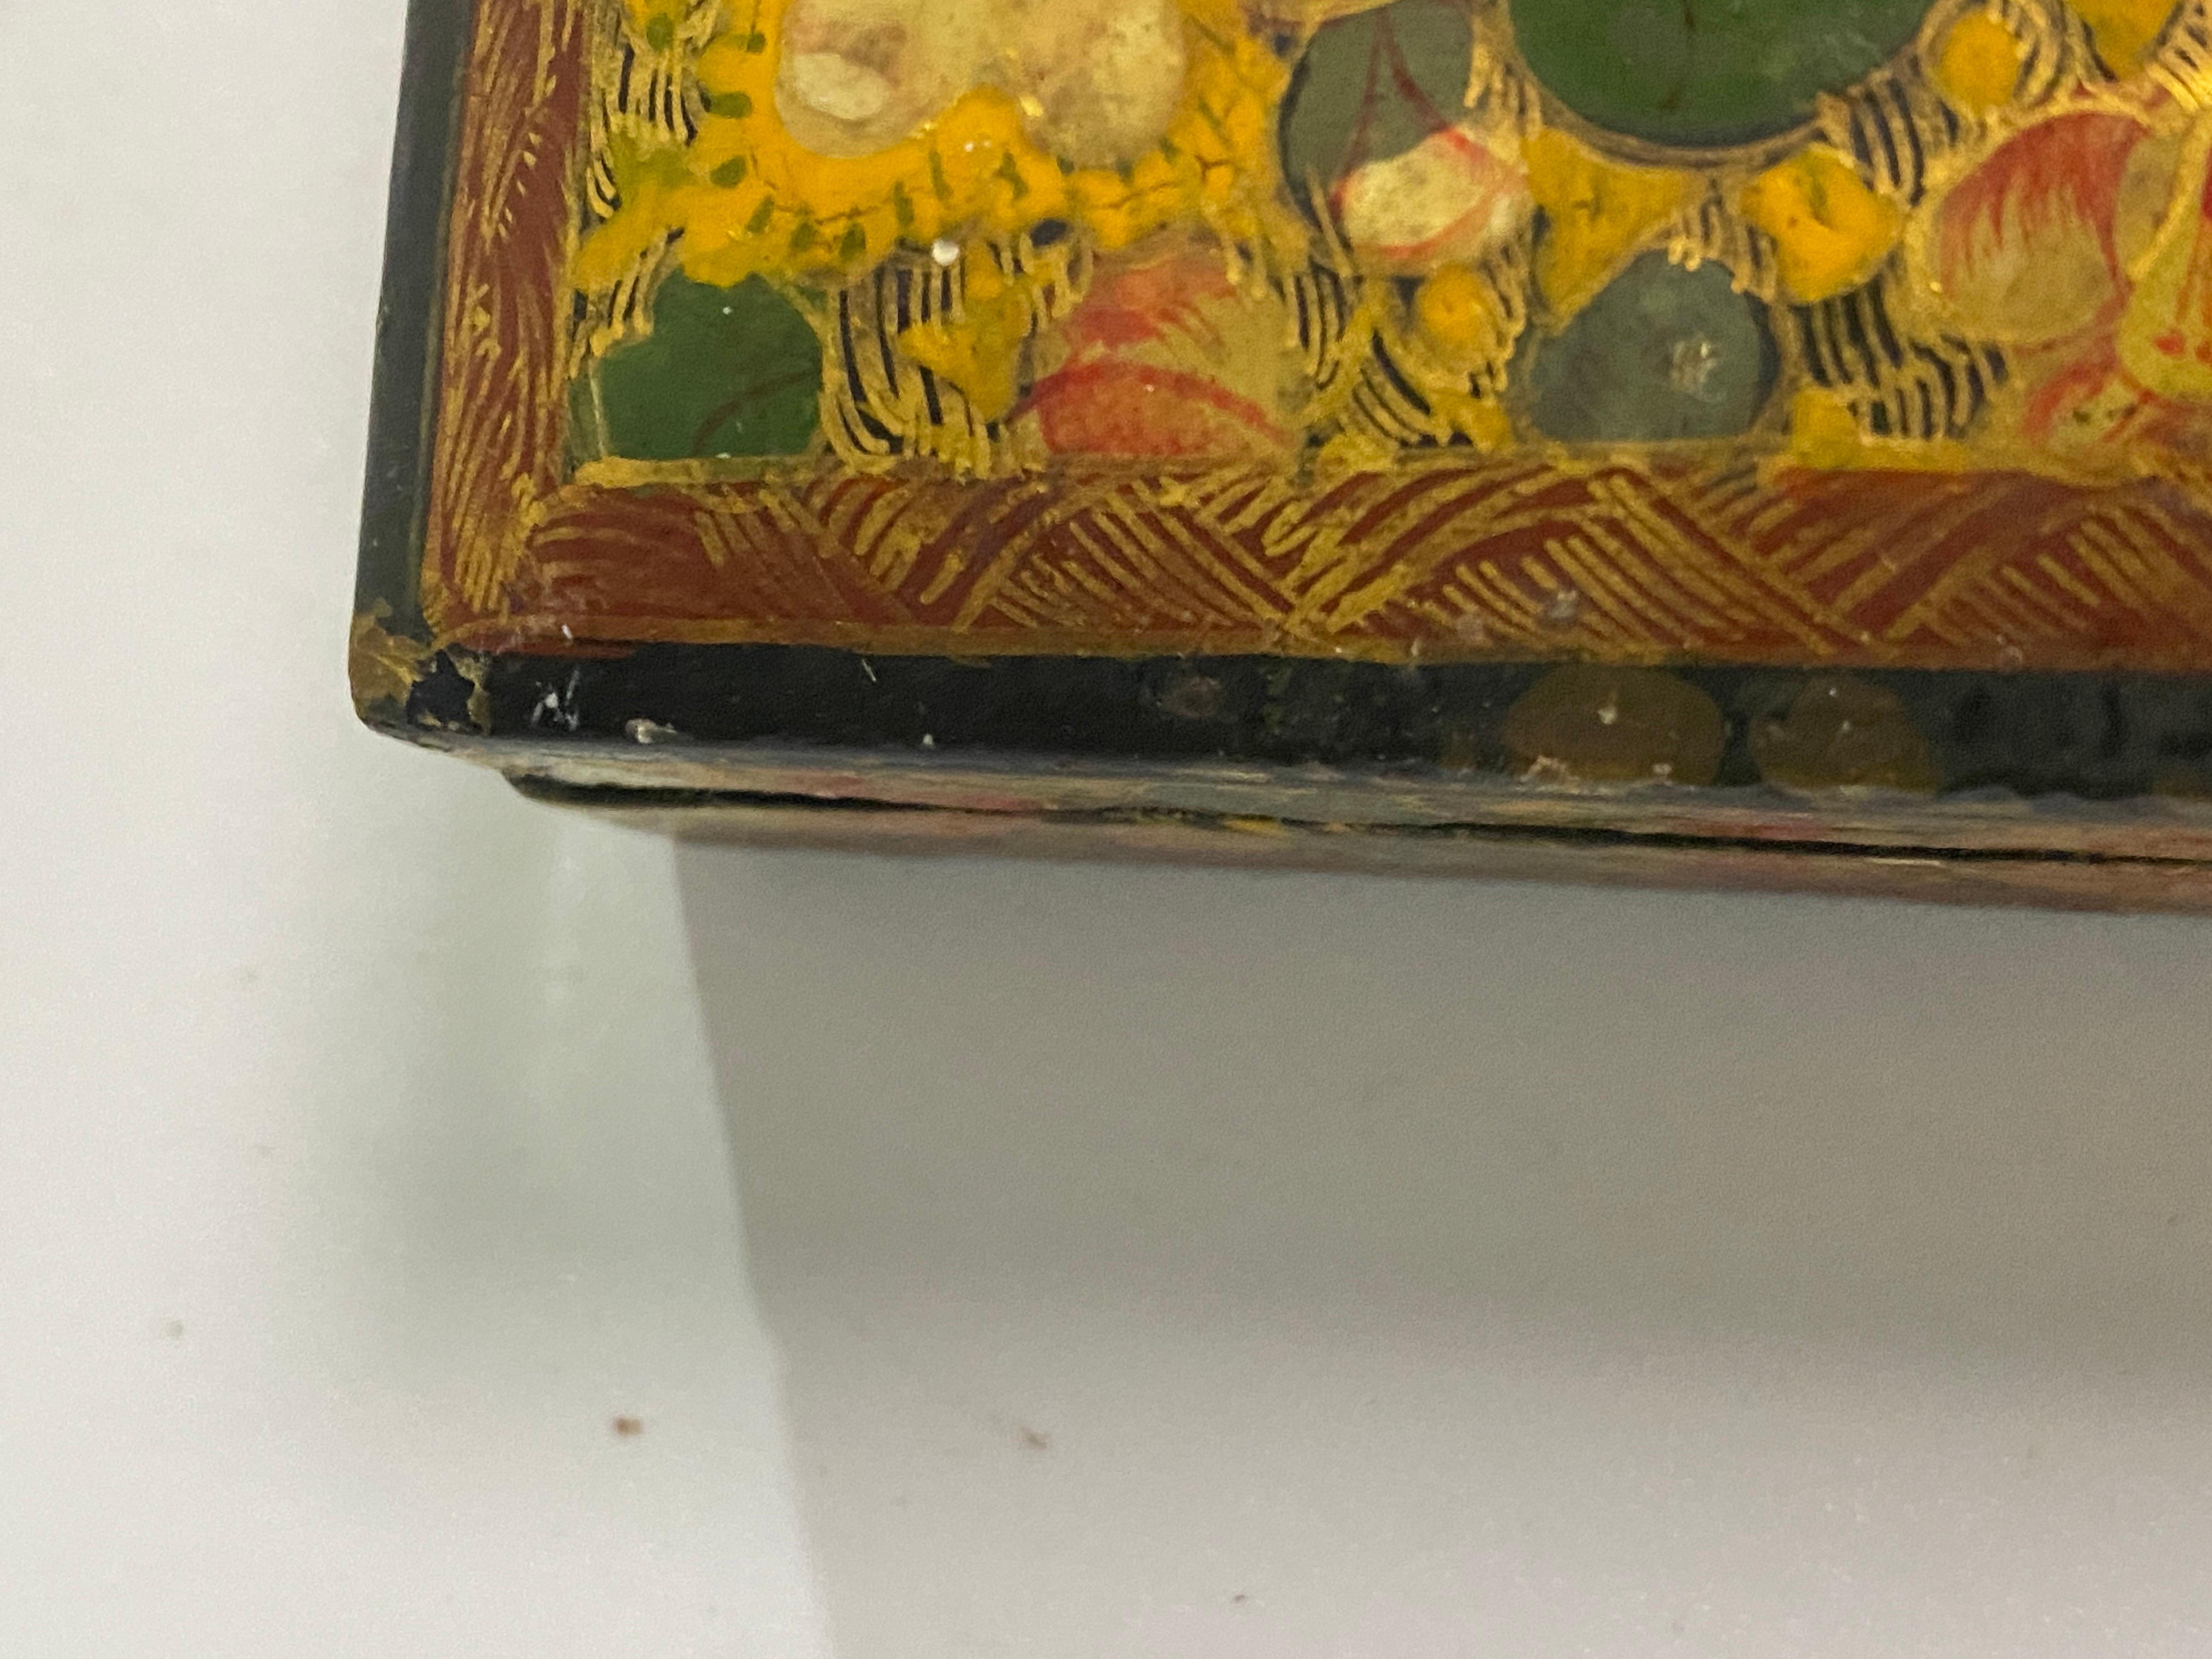 Small lacquered painted box, with floral decorations in yellow, red and green, it was made in China in the 19th century.